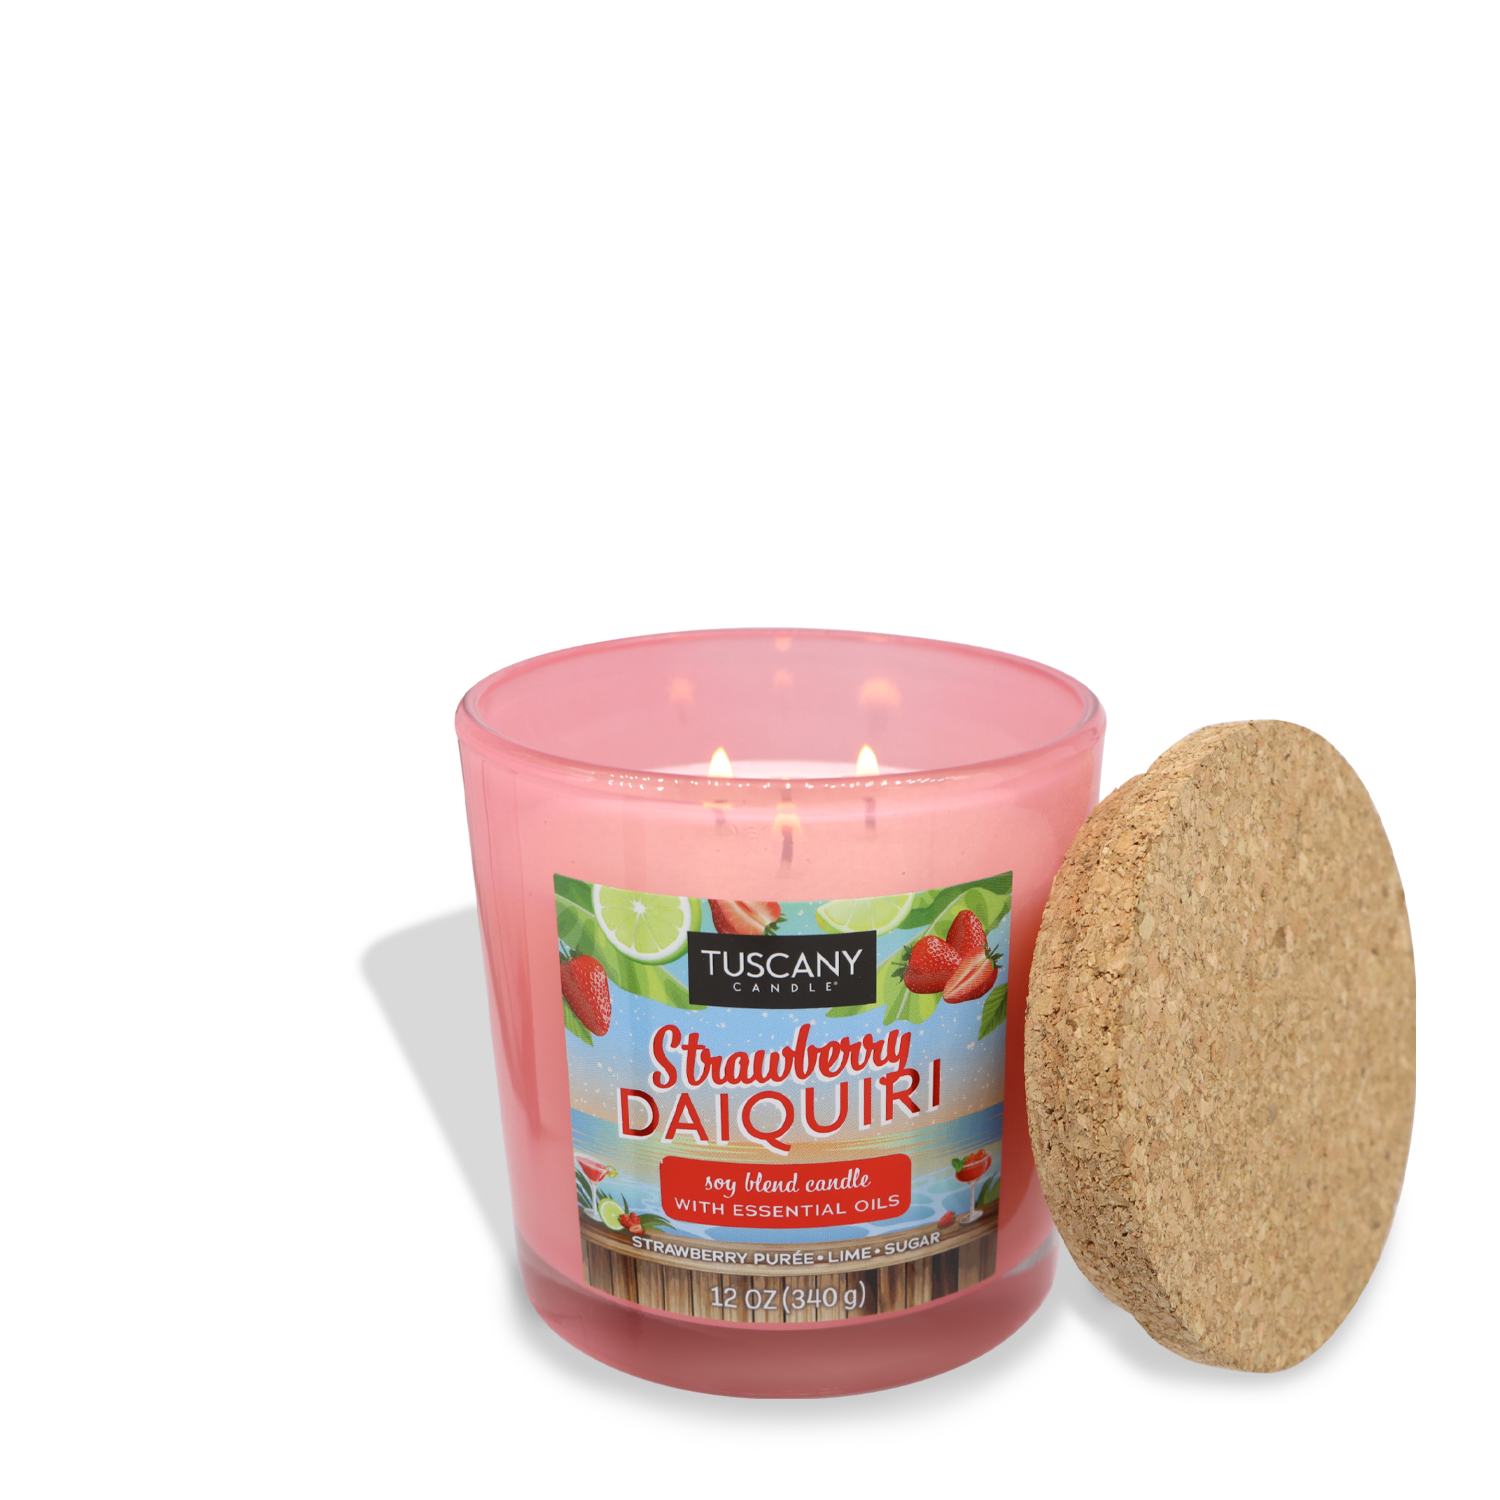 A pink Tuscany Candle® SEASONAL labeled "Strawberry Daiquiri (12 oz) – Sunset Beach Bar Collection" sits beside its cork lid. The candle is described as a soy blend with essential oils, capturing the tropical joy of sugared strawberries, and has a net weight of 12 oz (340 g).